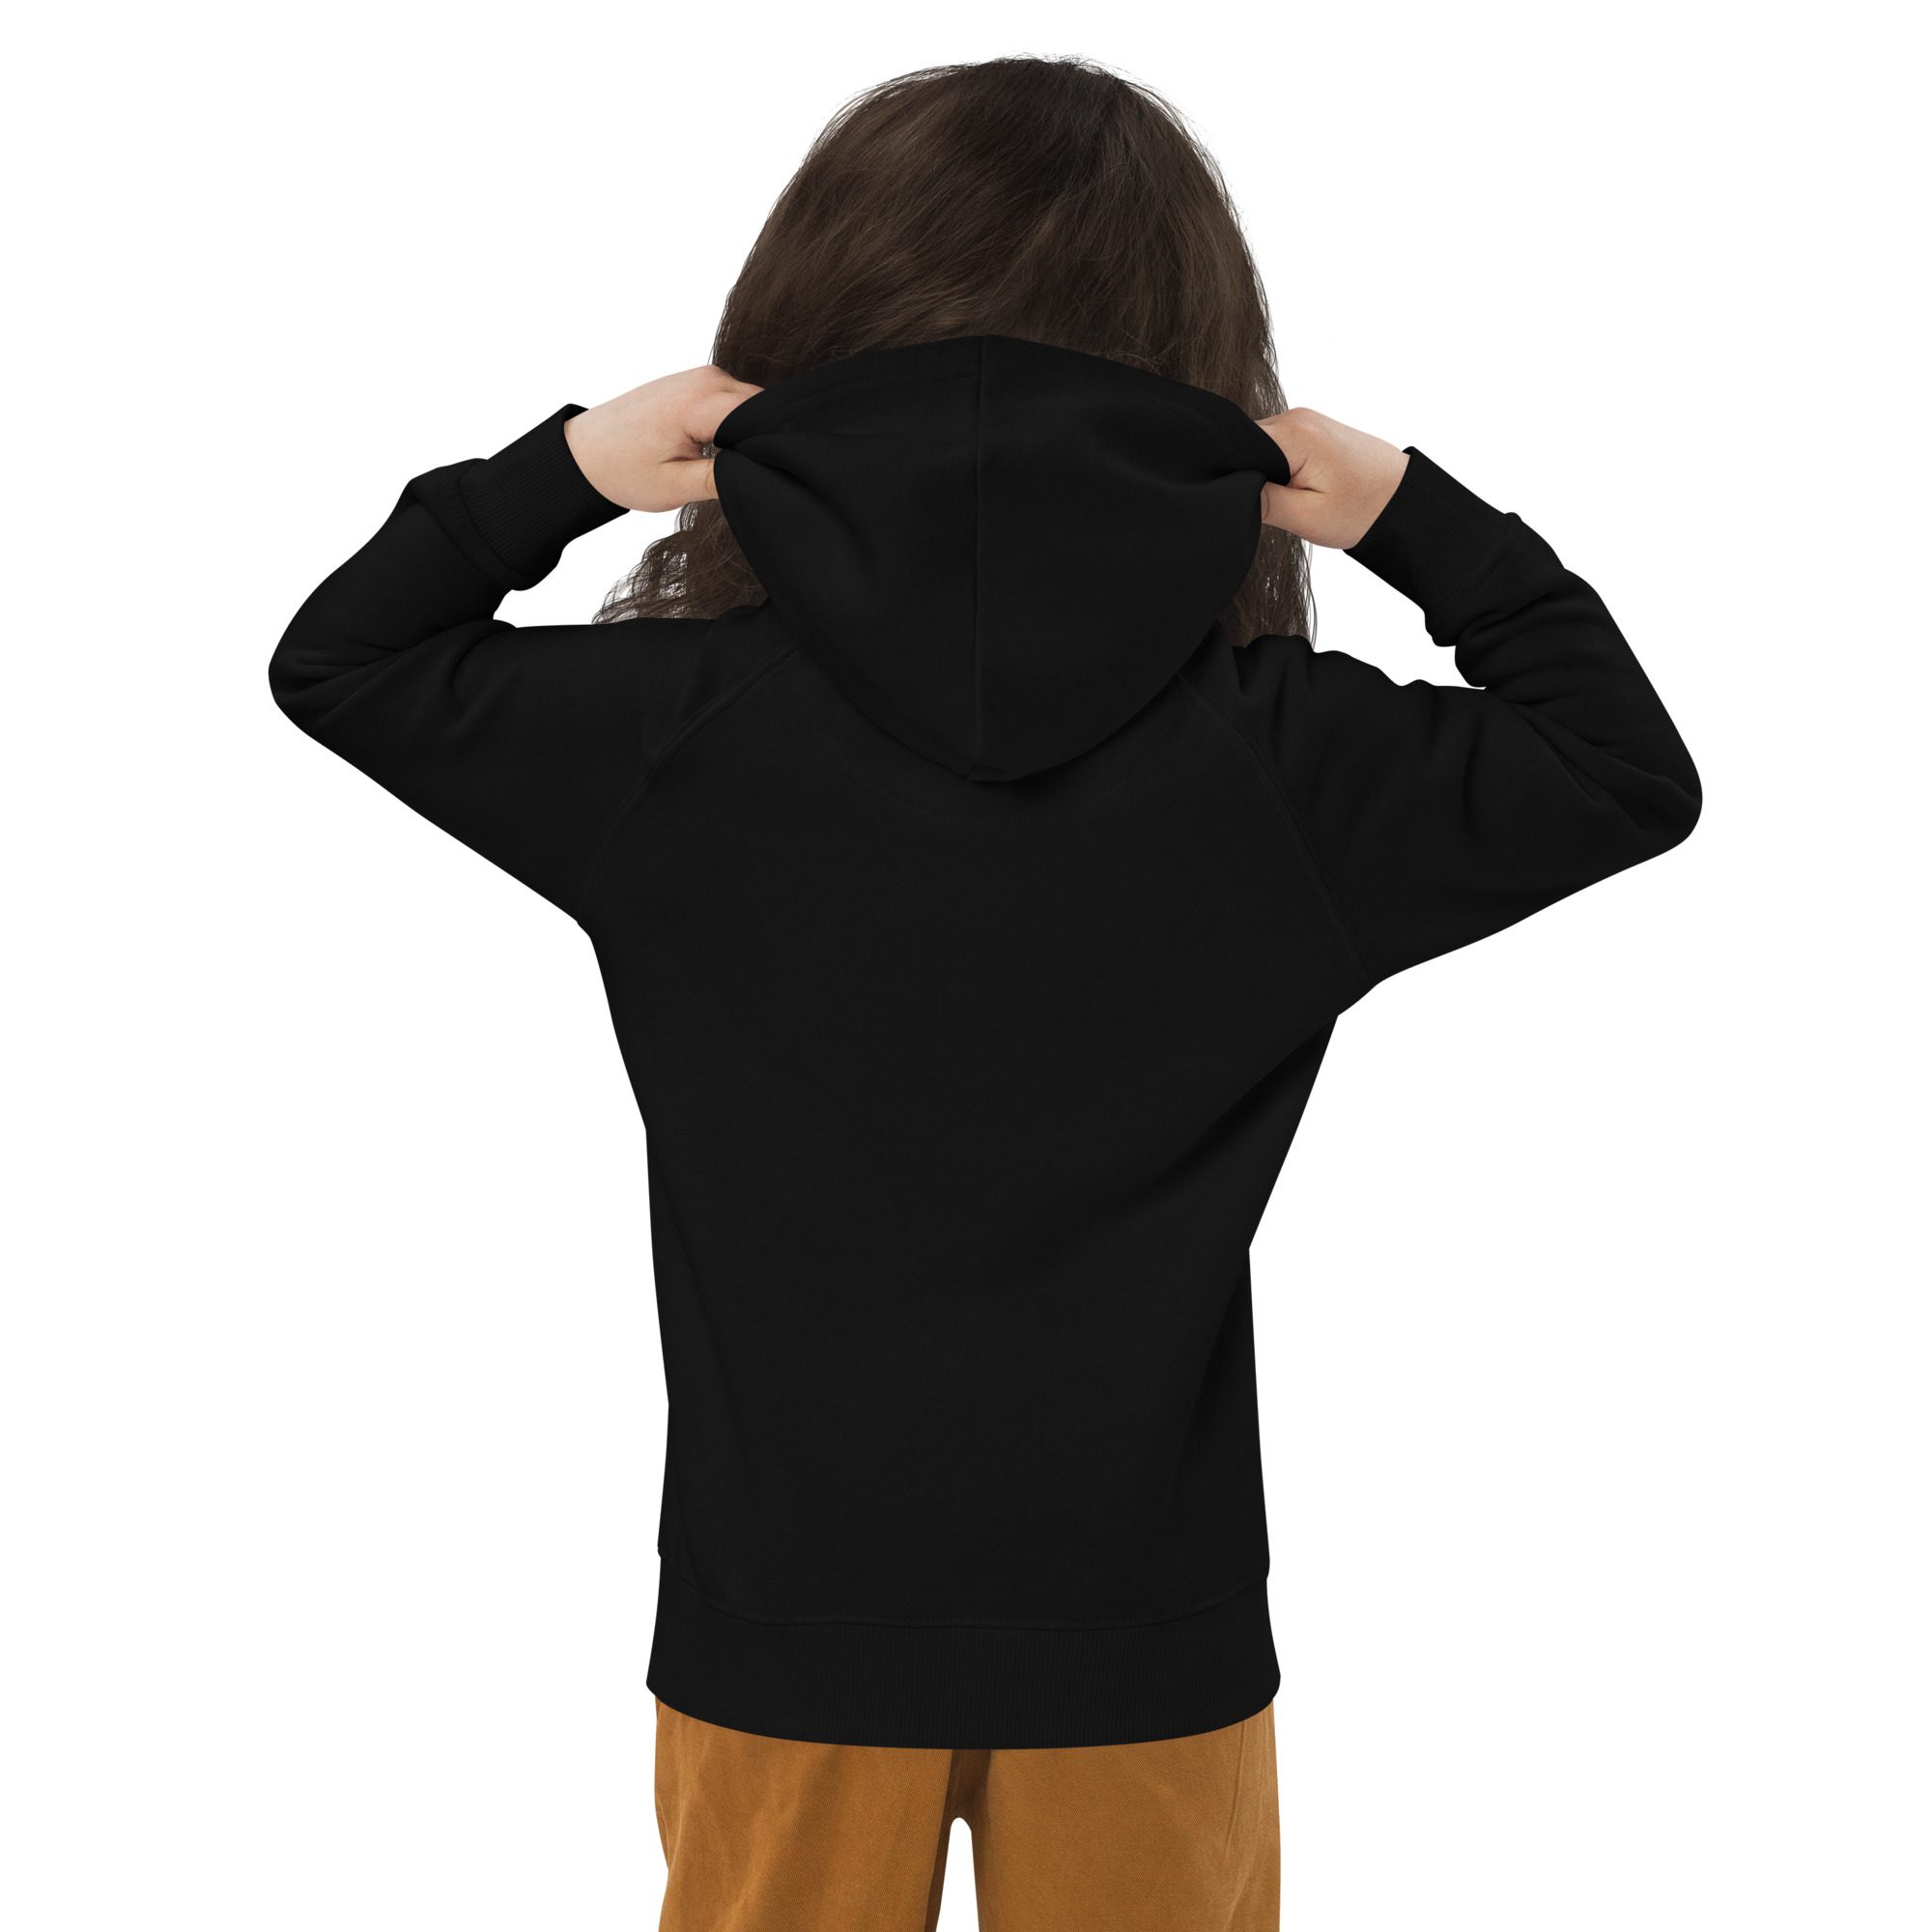 I’m Not Your Neurotypical Girl Kids Eco Hoodie